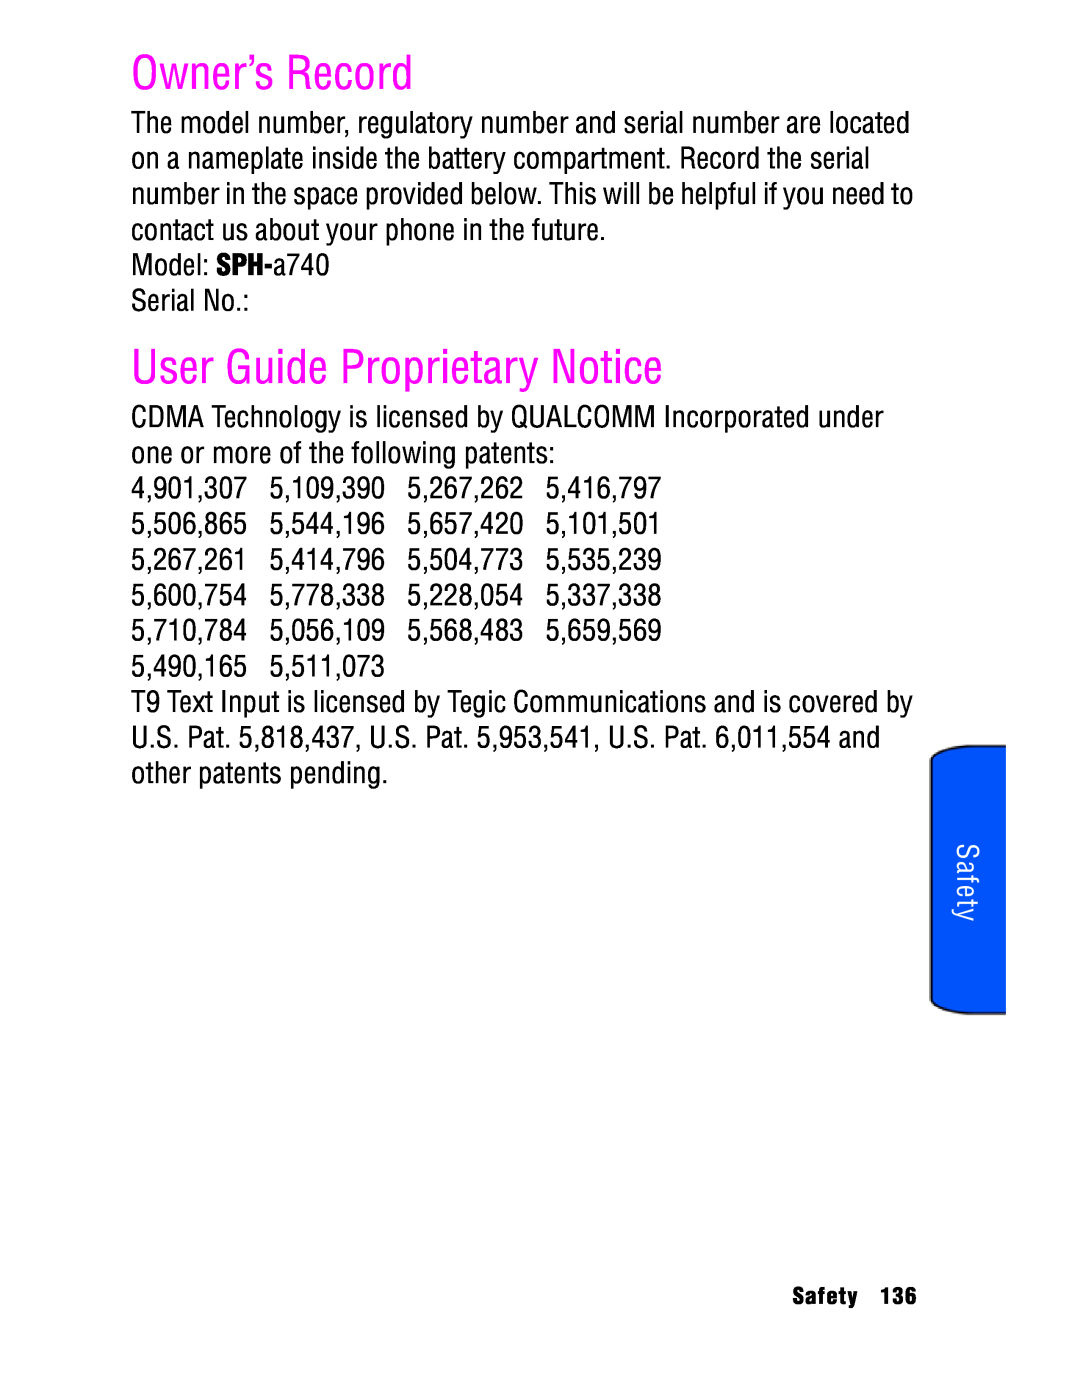 Samsung SPH-a740 manual Owner’s Record, User Guide Proprietary Notice, Safety 